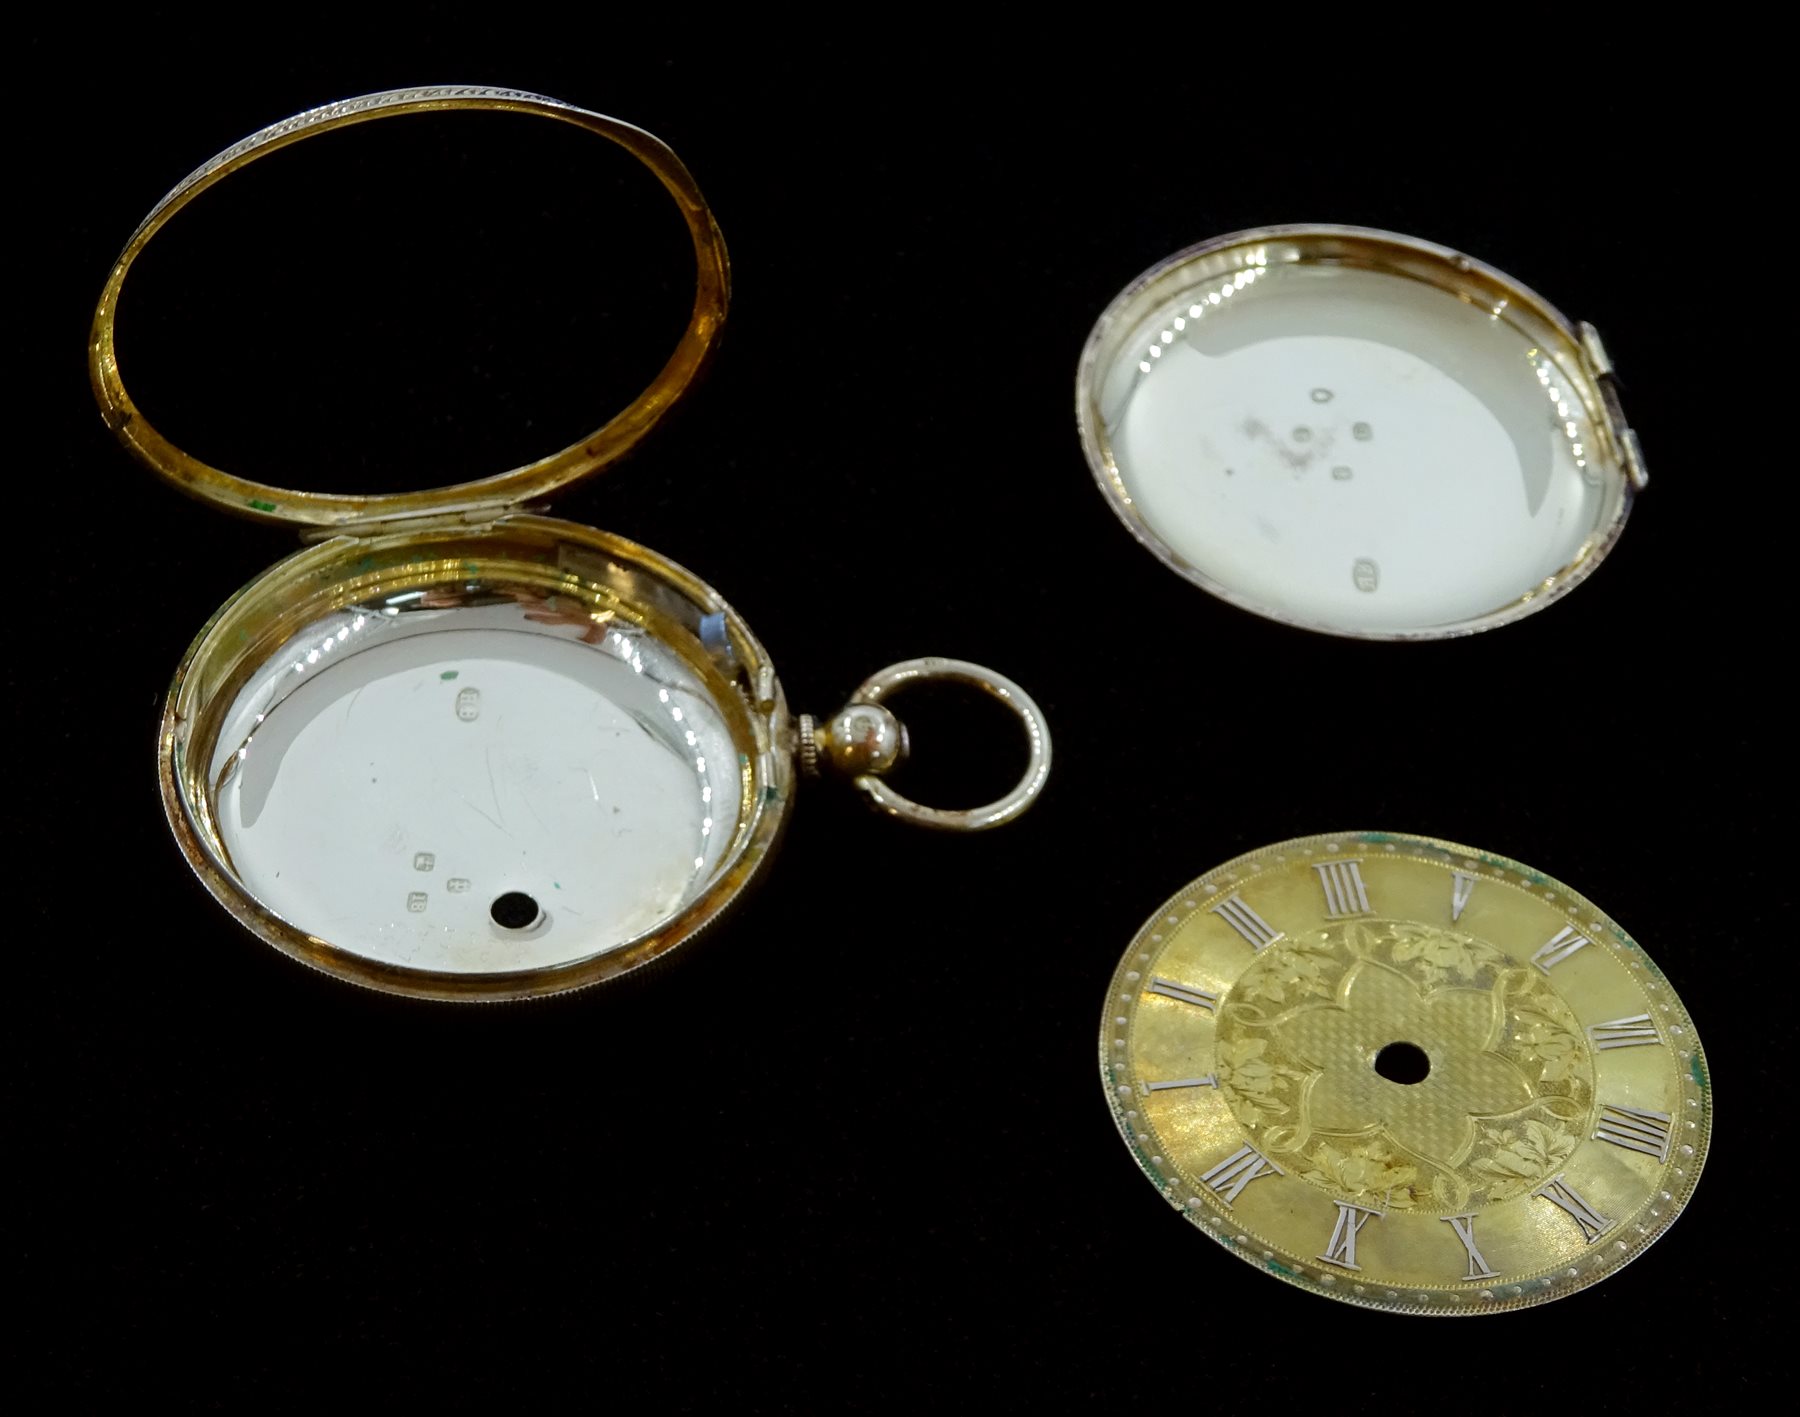 Victorian 18ct gold pocket watch case by Henry Buckland, London 1870 with 18ct gold dial